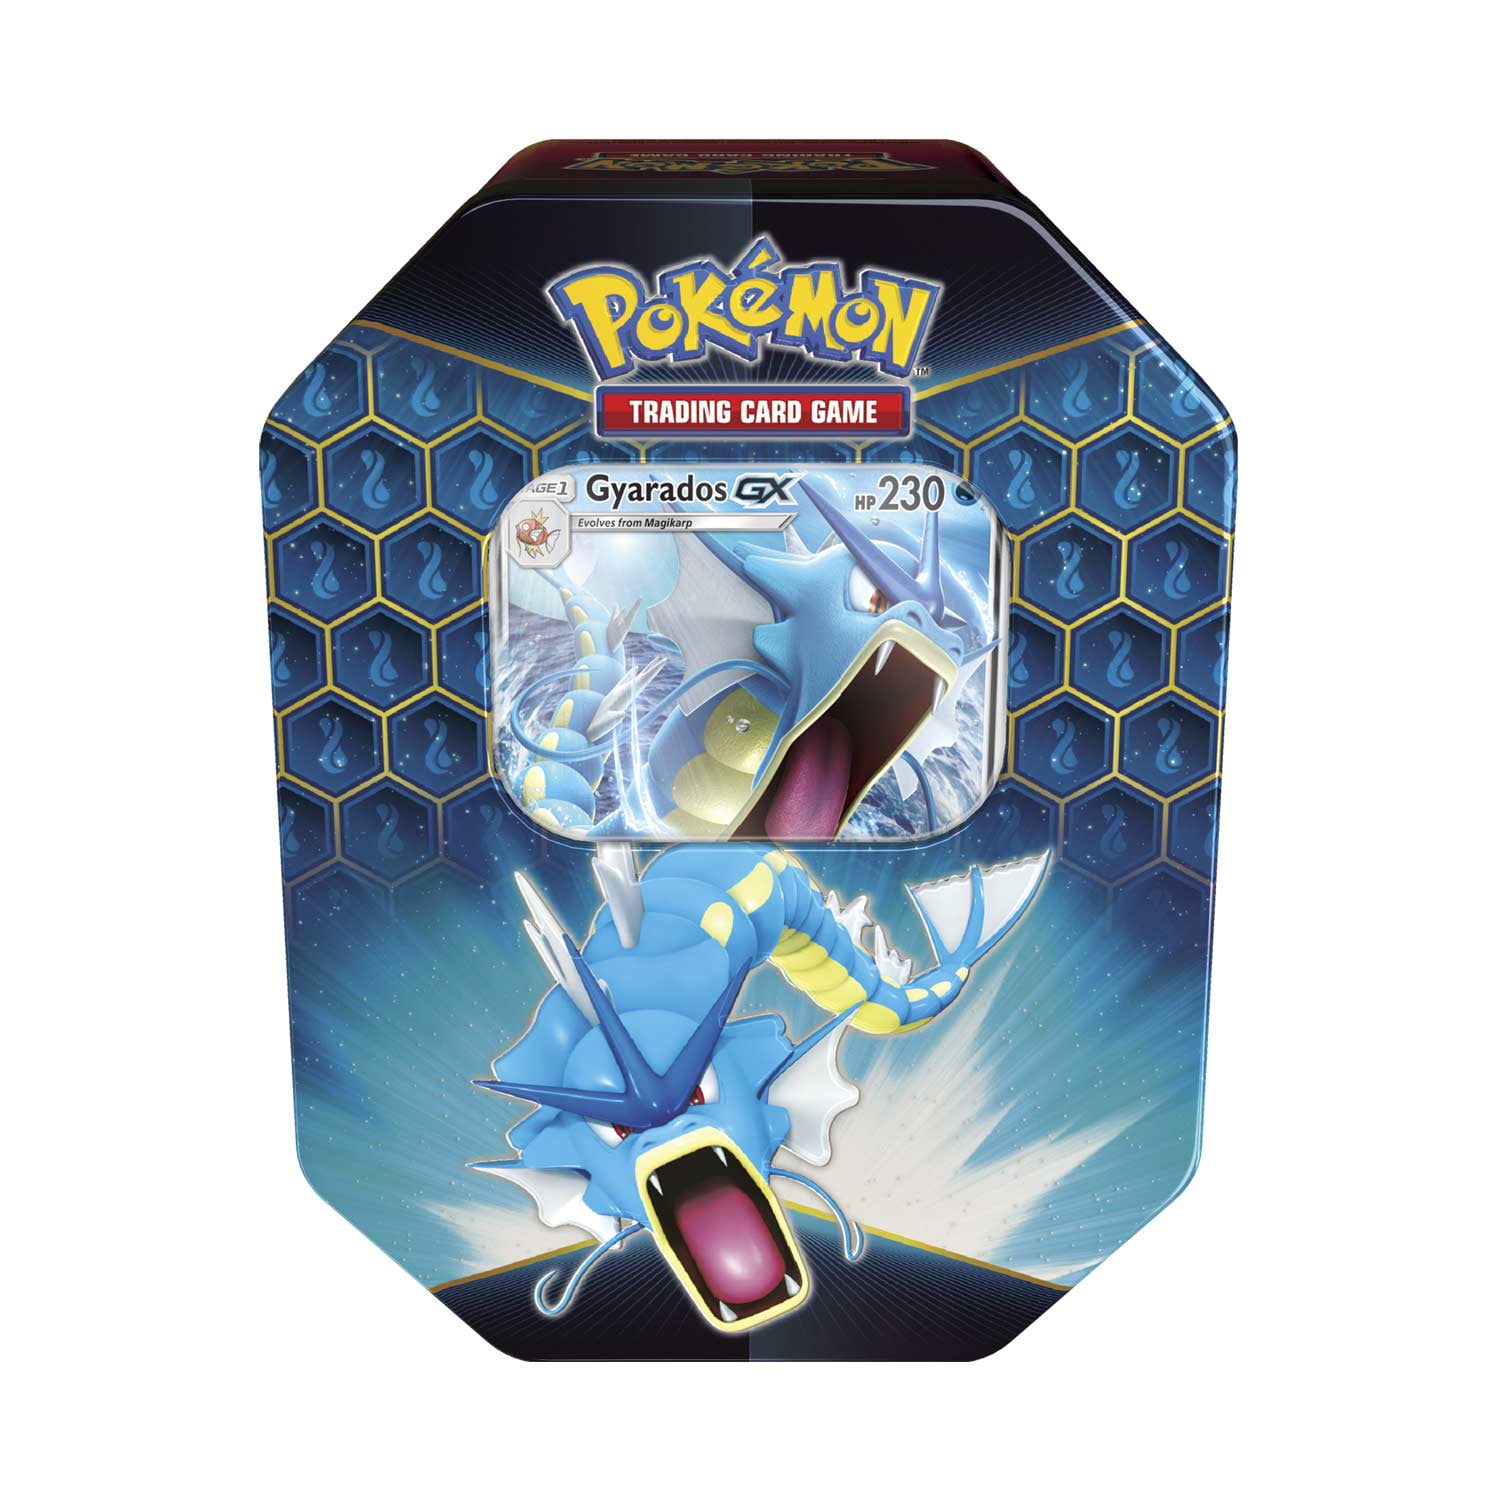 Details about   Pokemon V Power Fall Tins Eevee Brand New & Sealed Contains 4 Booster Packs Plus 